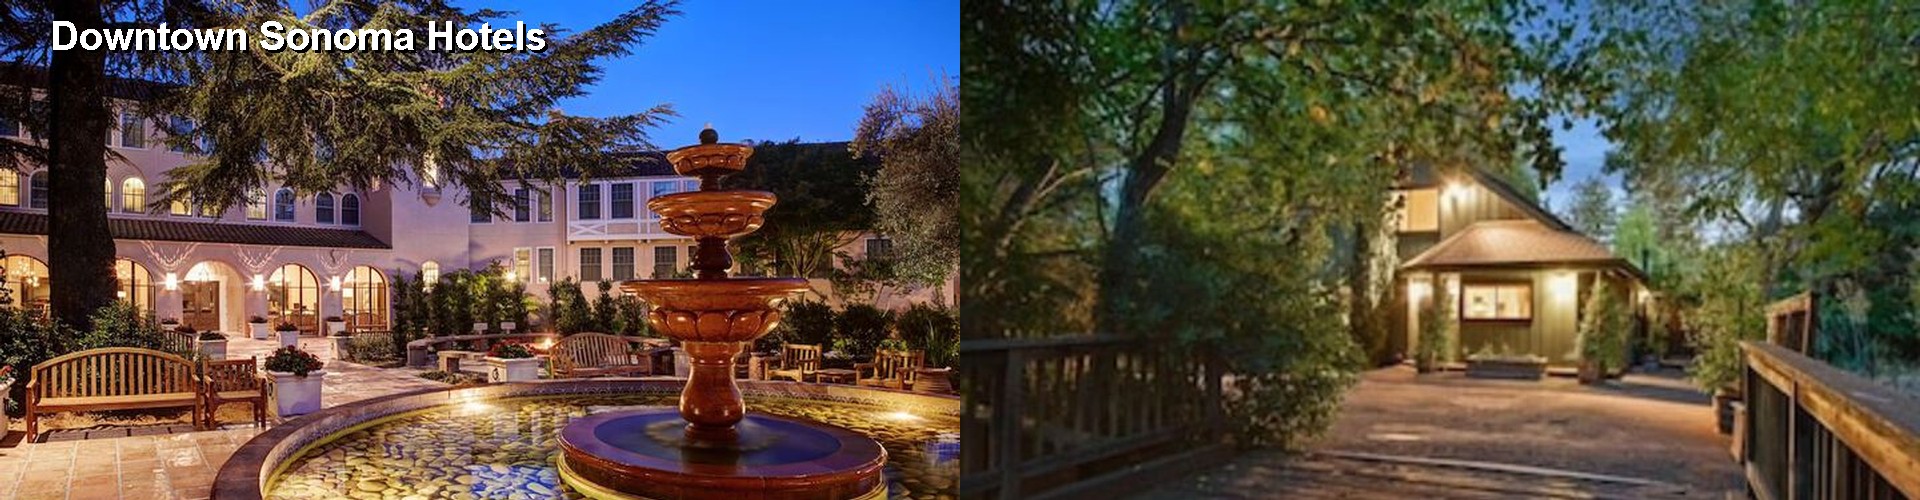 5 Best Hotels near Downtown Sonoma